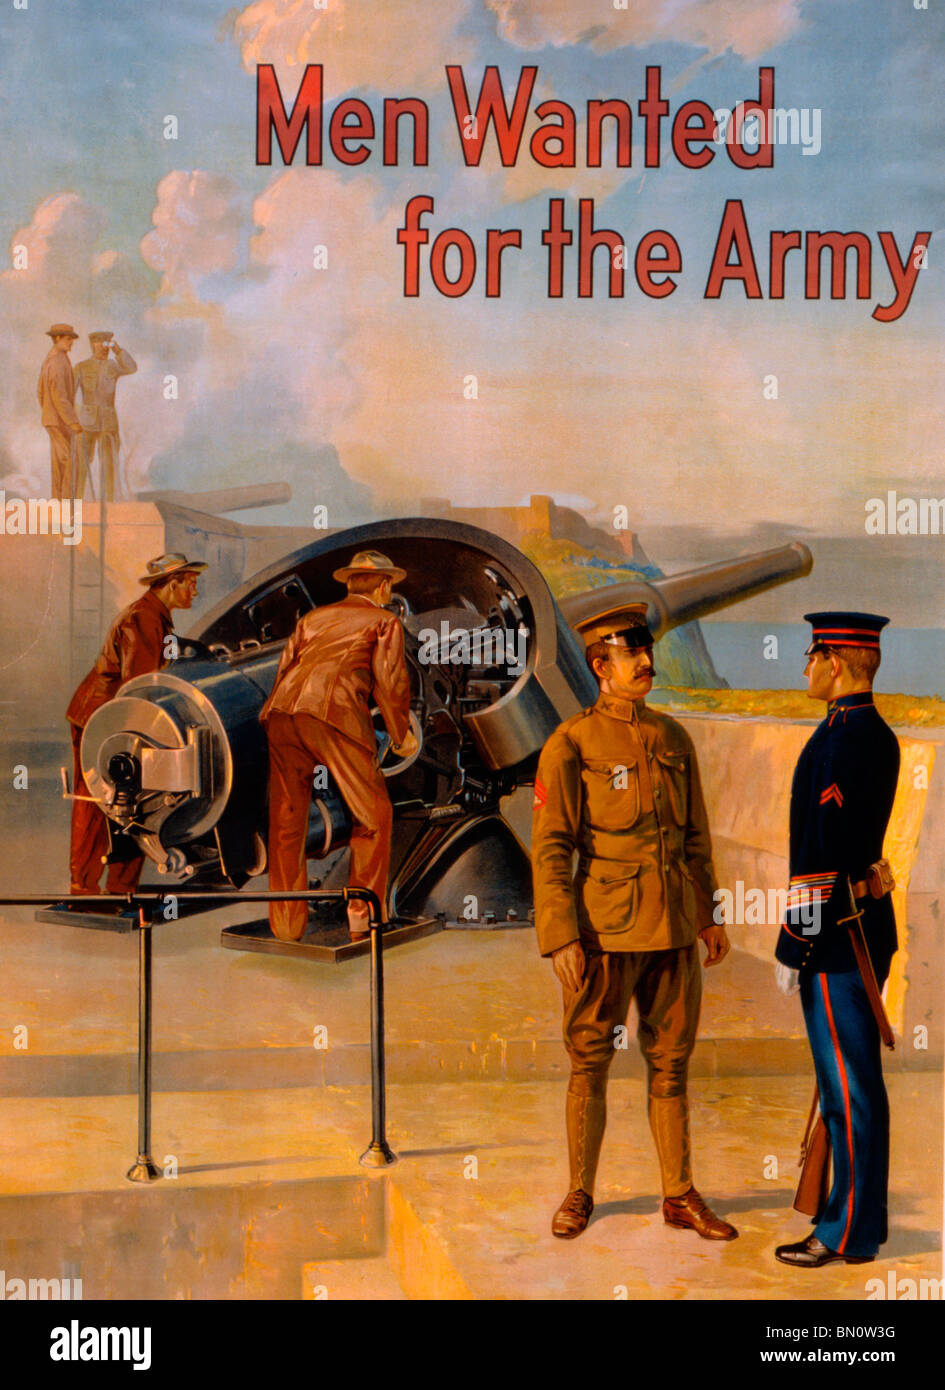 Men wanted for the army - US Army Recruiting Poster - World War I Stock Photo